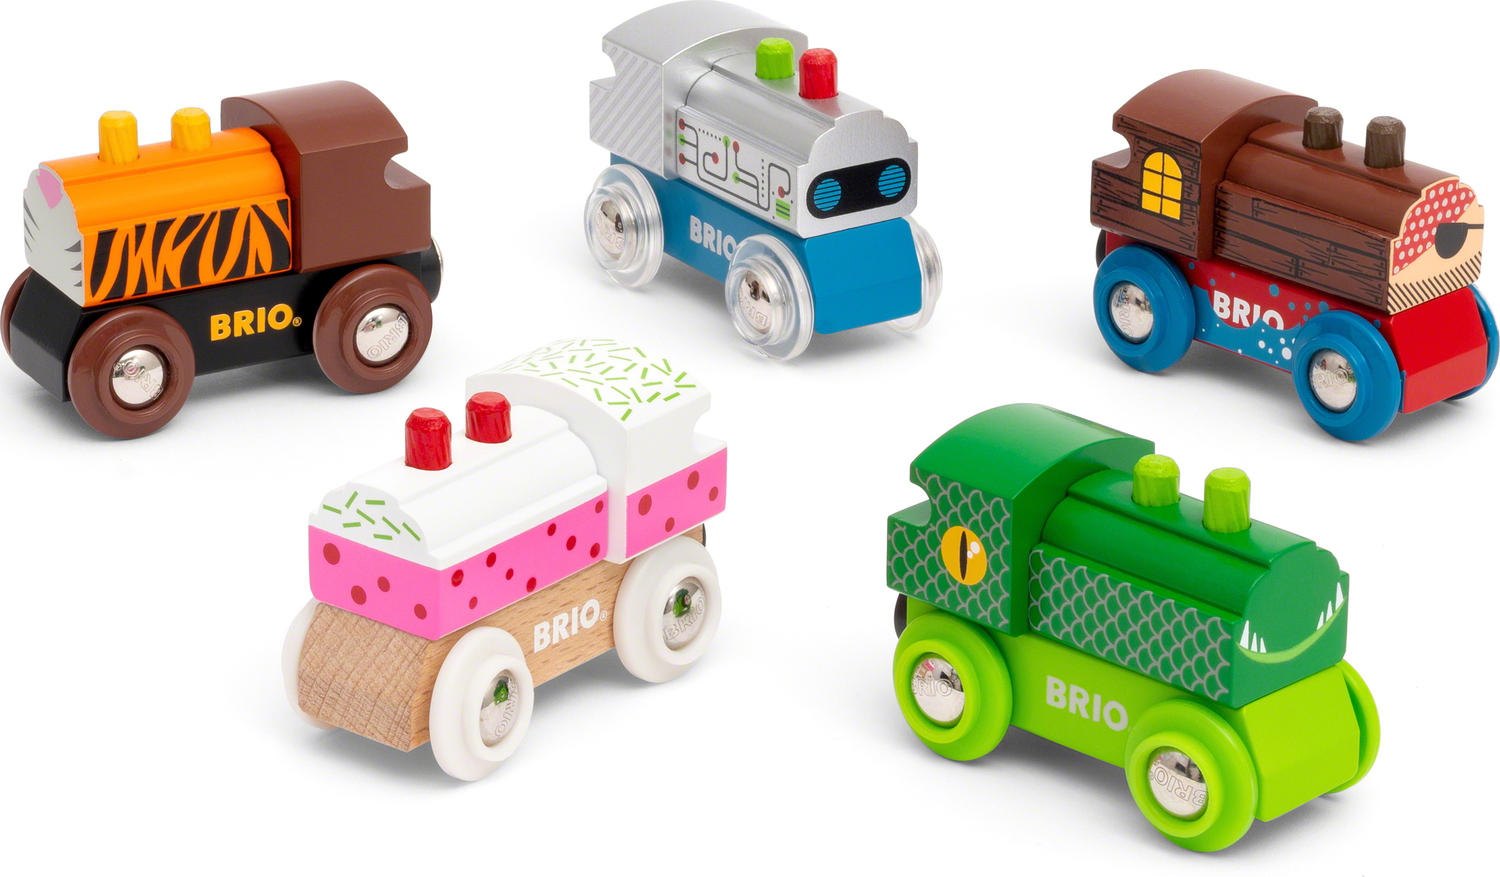 Calico Toy Shoppe - Themed Train Assortment from BRIO